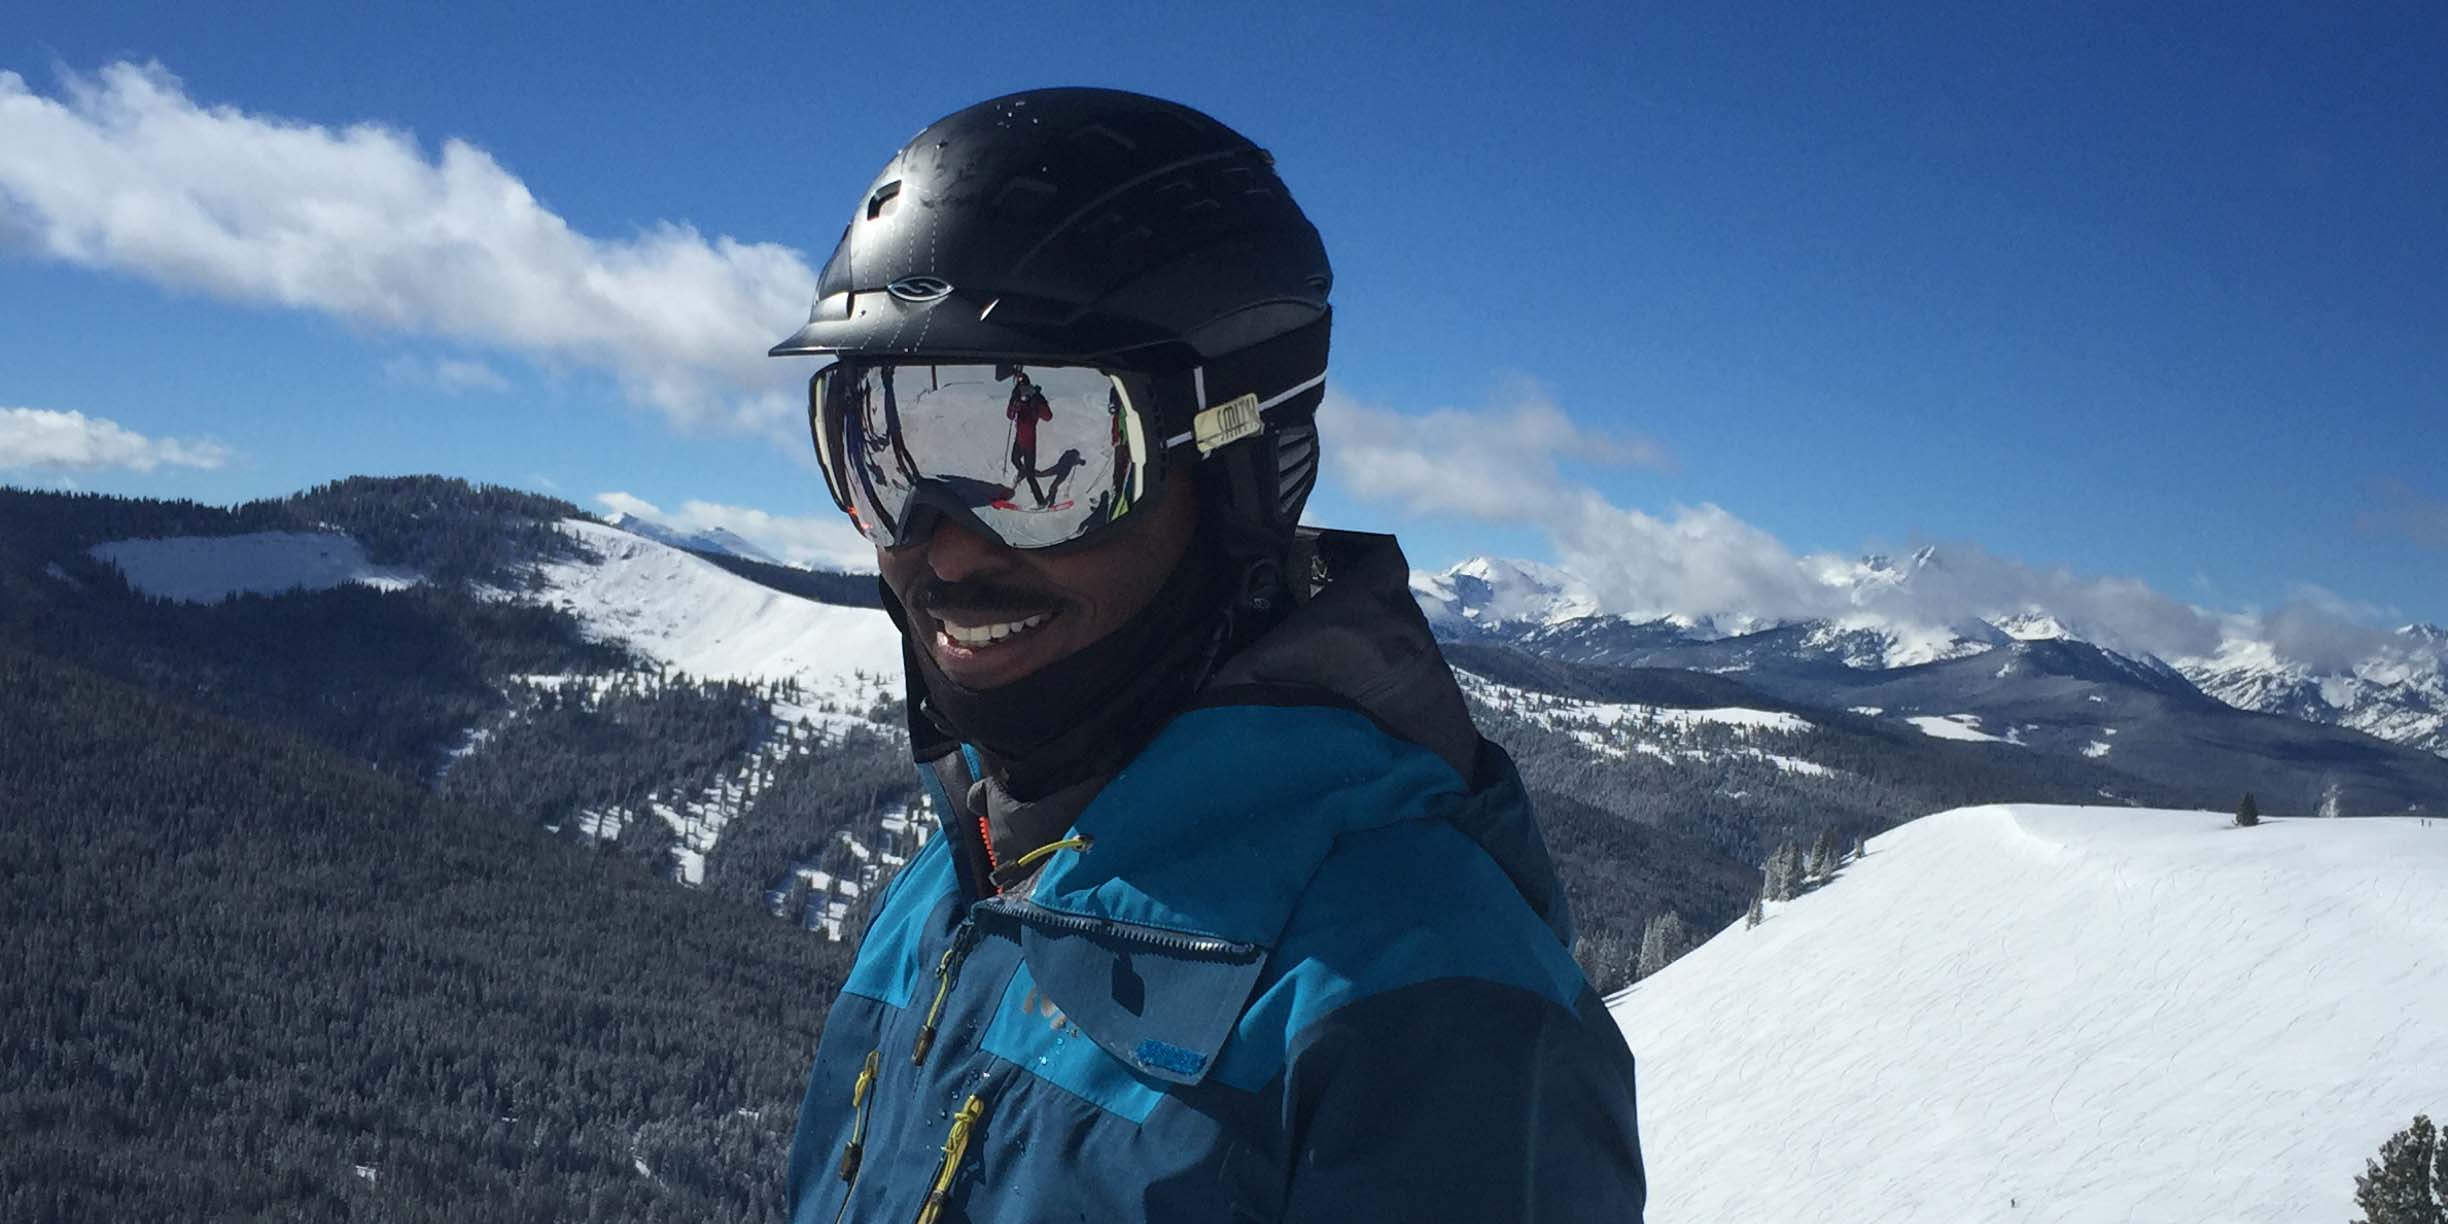 Mike Carey in helmet and goggles in front of snowy backdrop.